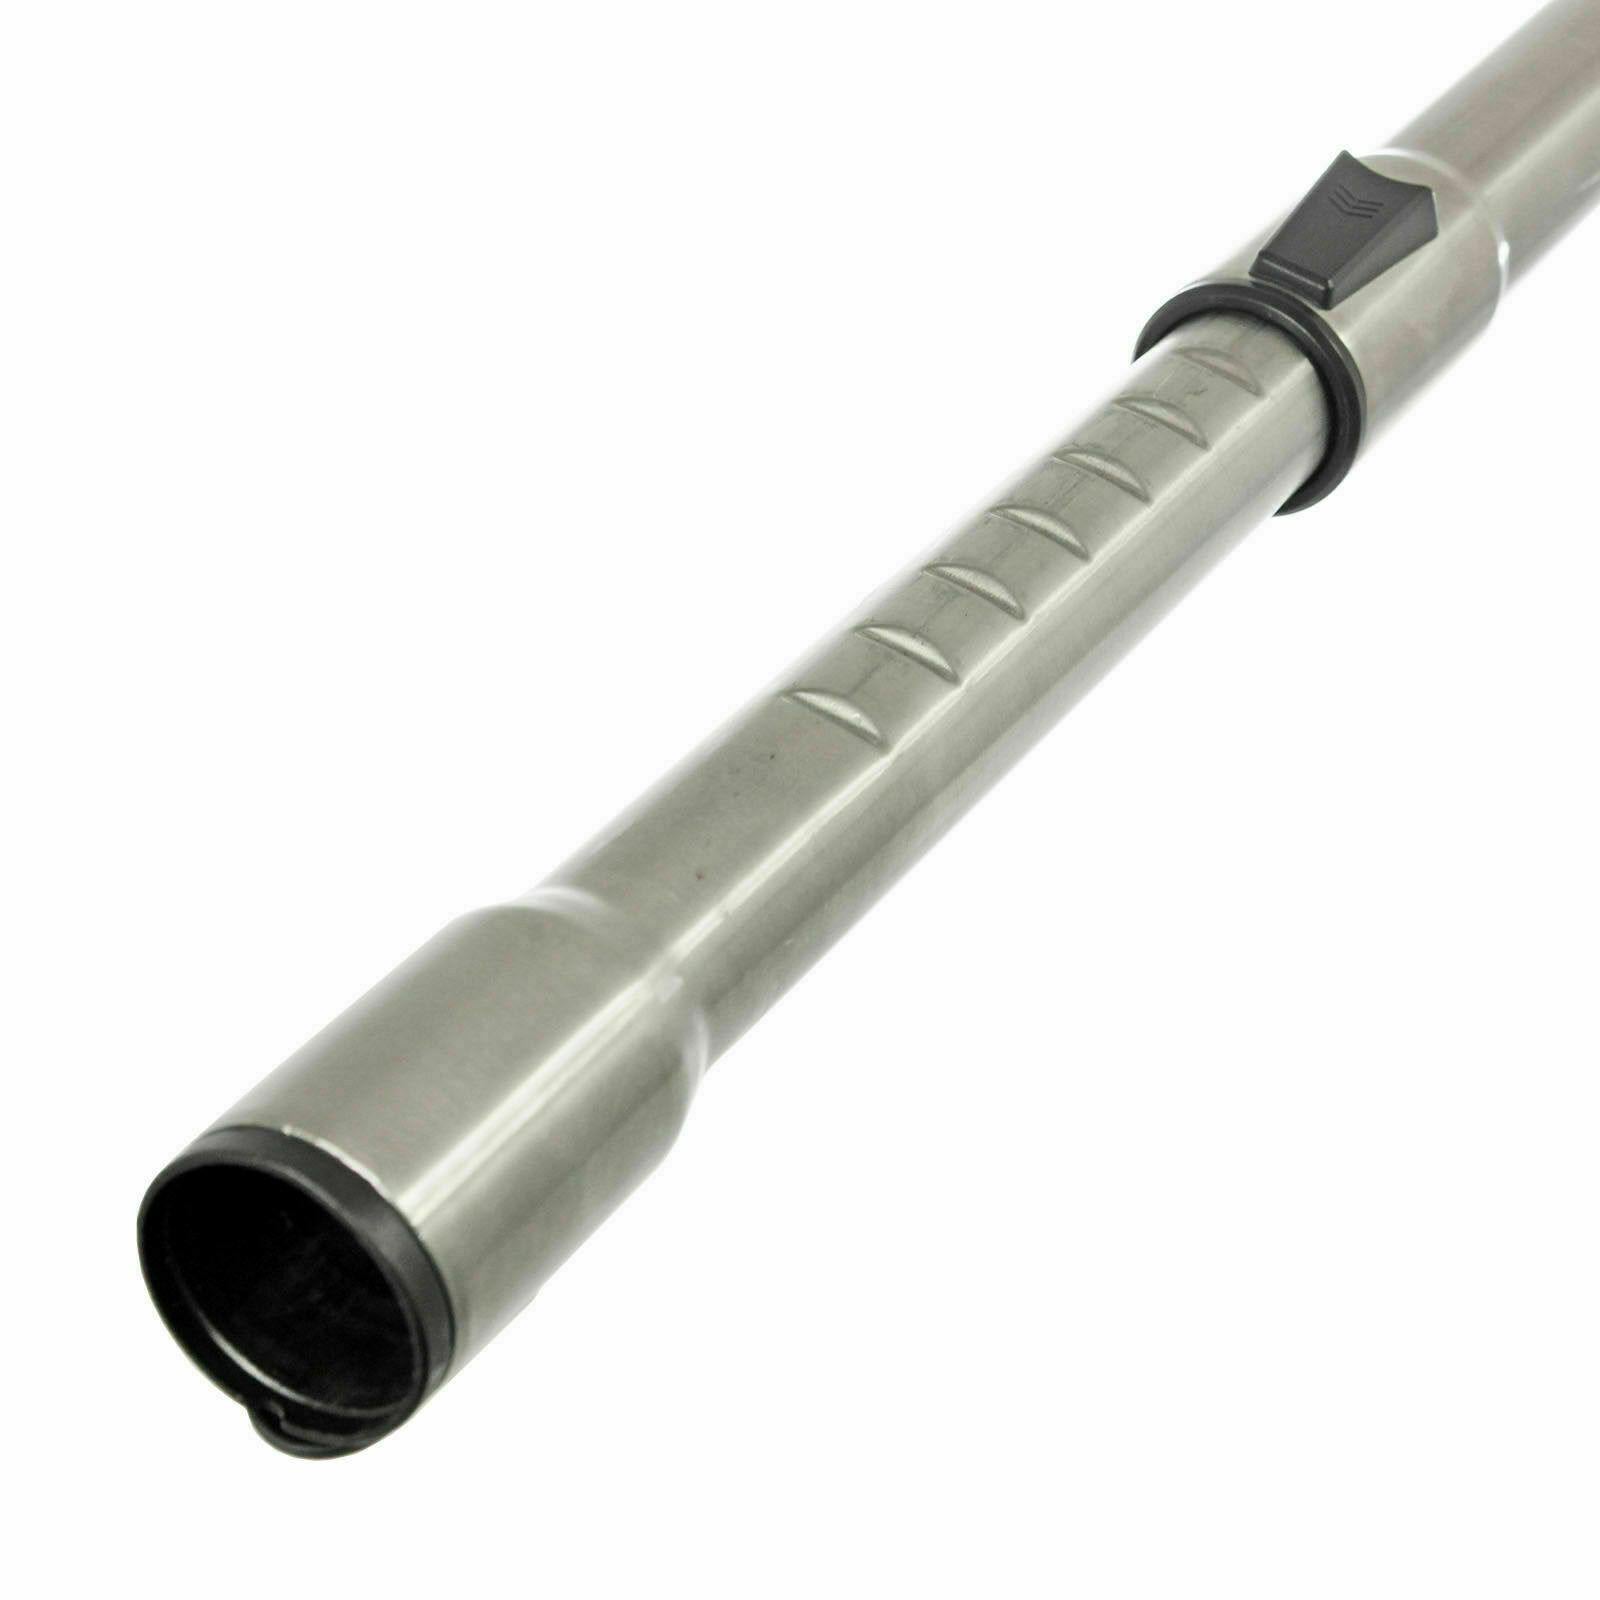 Telescopic Extension Tube Pipe Rod For Miele S5781 S6210 S6220 S6230 S6240 S768 Sparesbarn